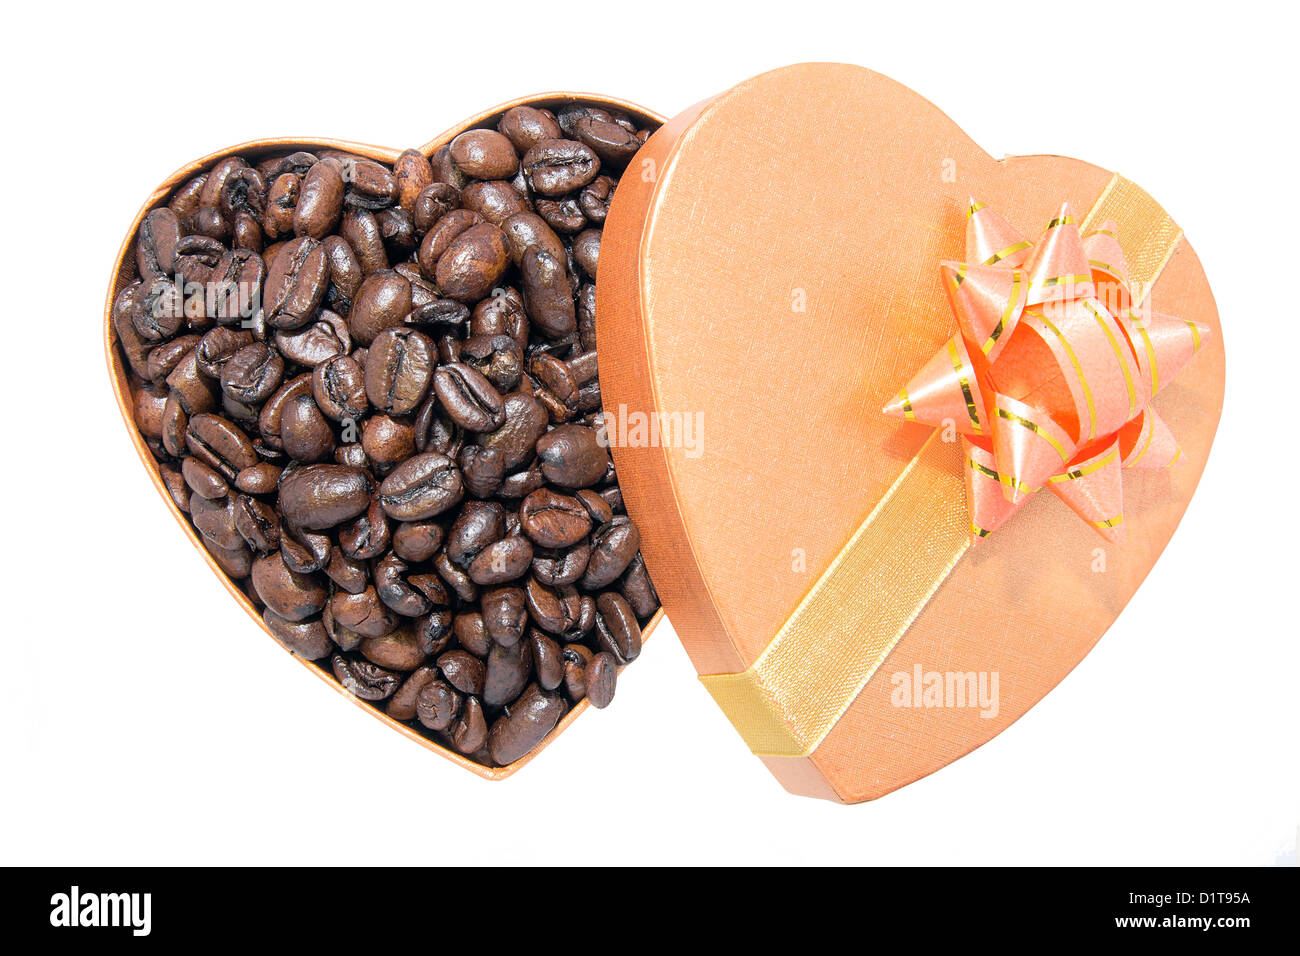 Roasted Coffee Beans in Heart Shaped Gift Box Isolated on White Background Stock Photo